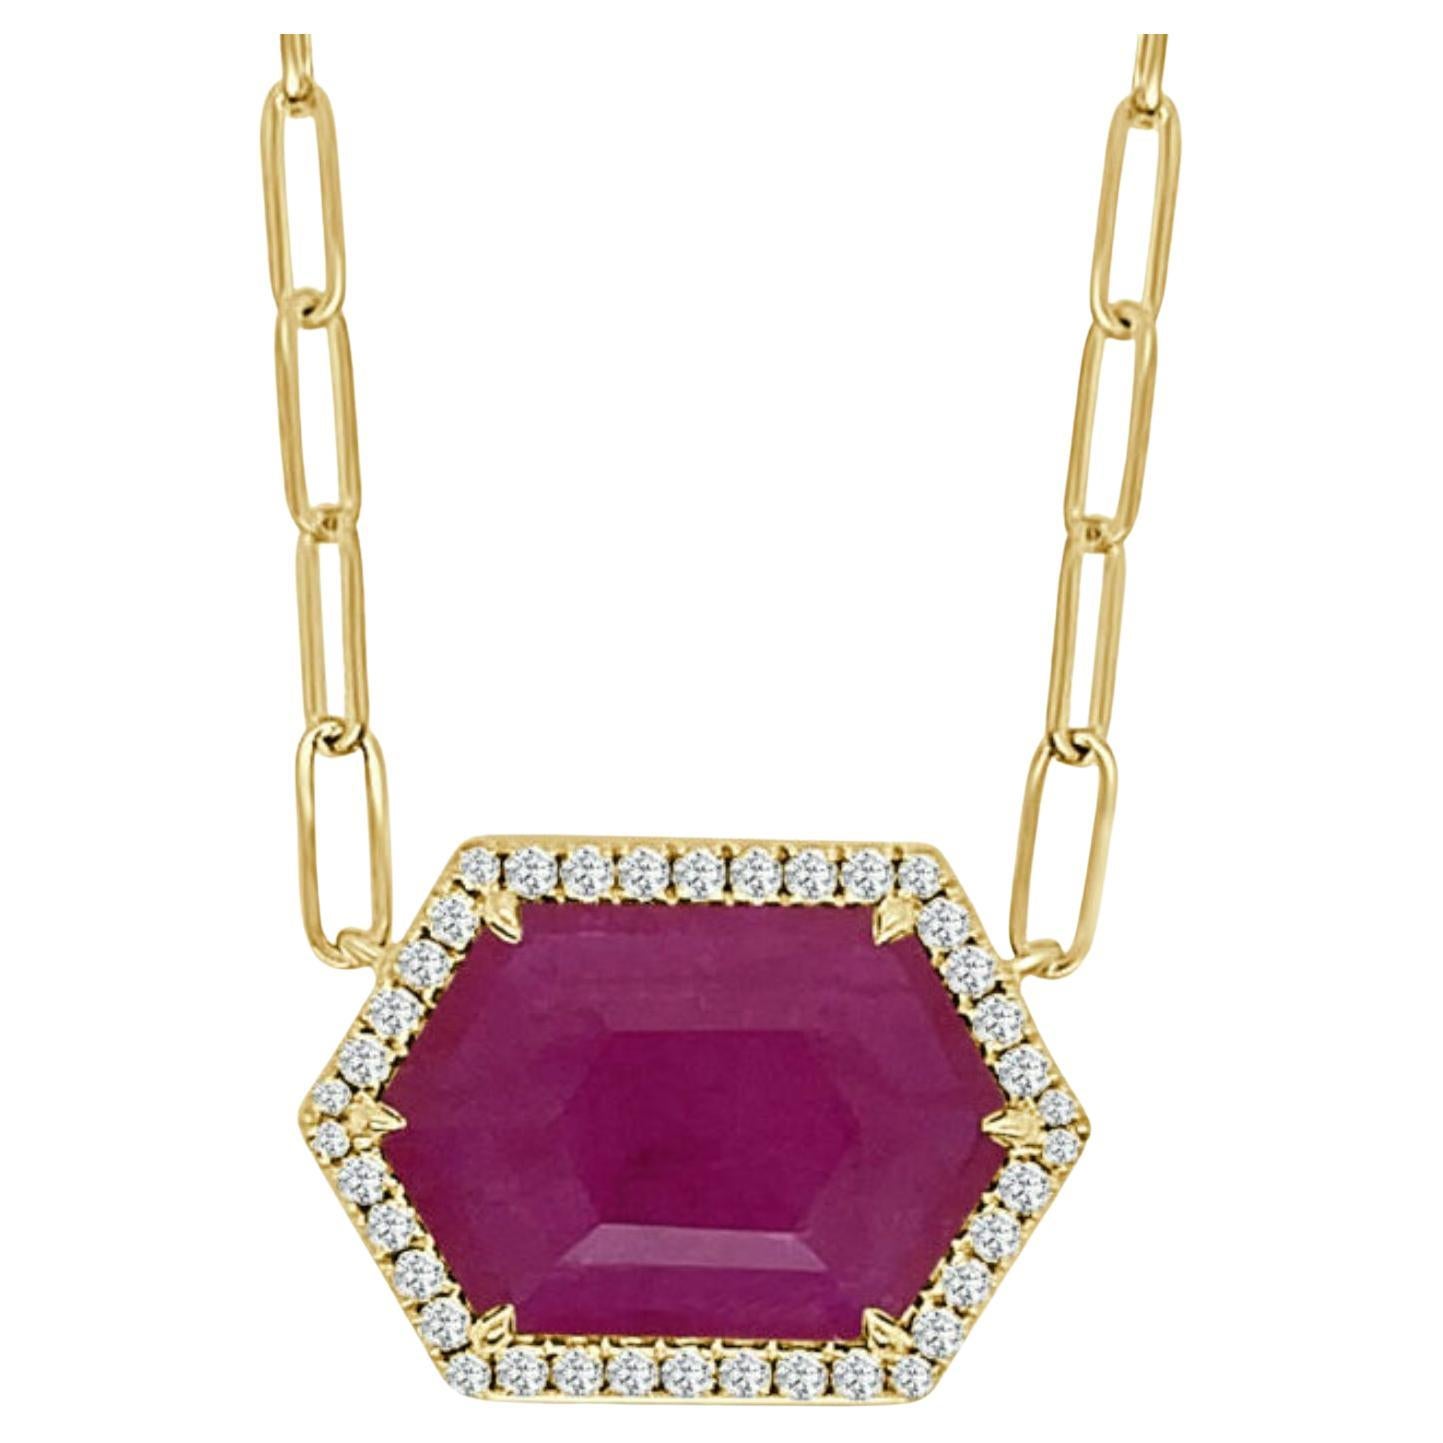 Frederic Sage Pendant Necklace in 18k Yellow Gold & Hexagonal Shape Ruby For Sale